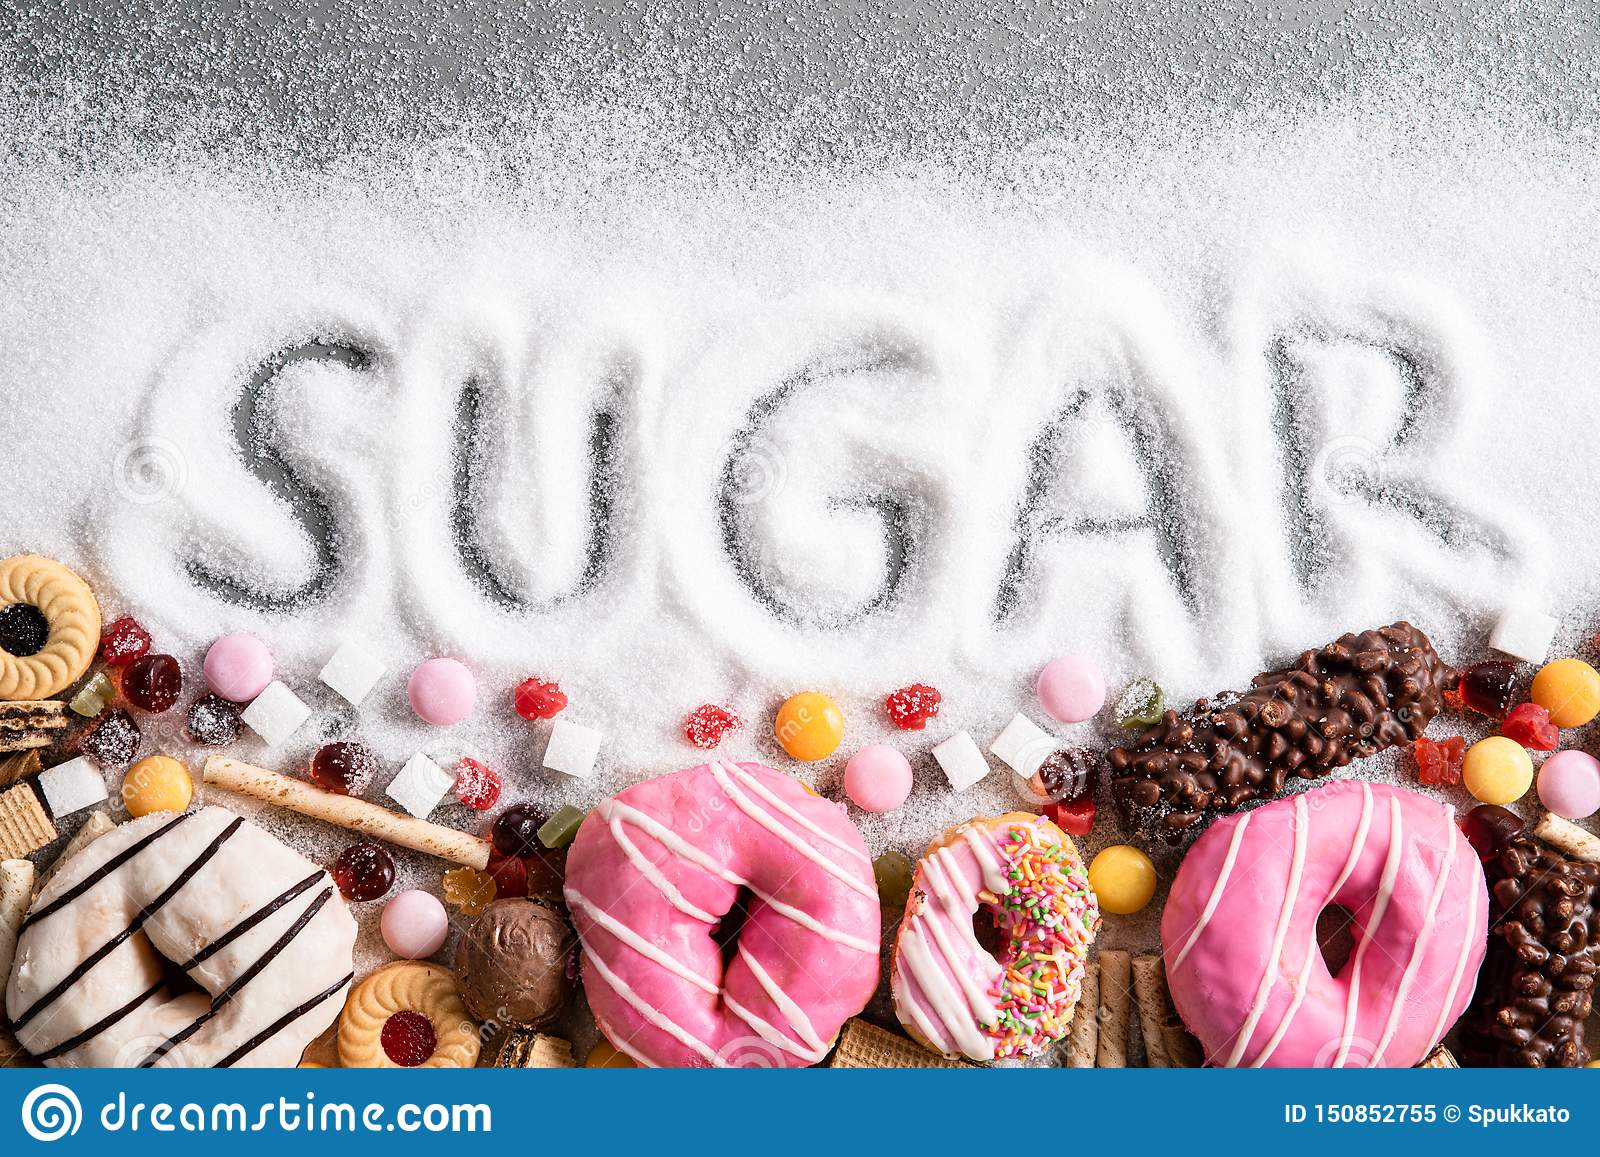 food-containing-sugar-mix-sweet-donuts-cakes-candy-sugar-spread-written-text-unhealthy-nutrition-chocolate-150852755.jpg